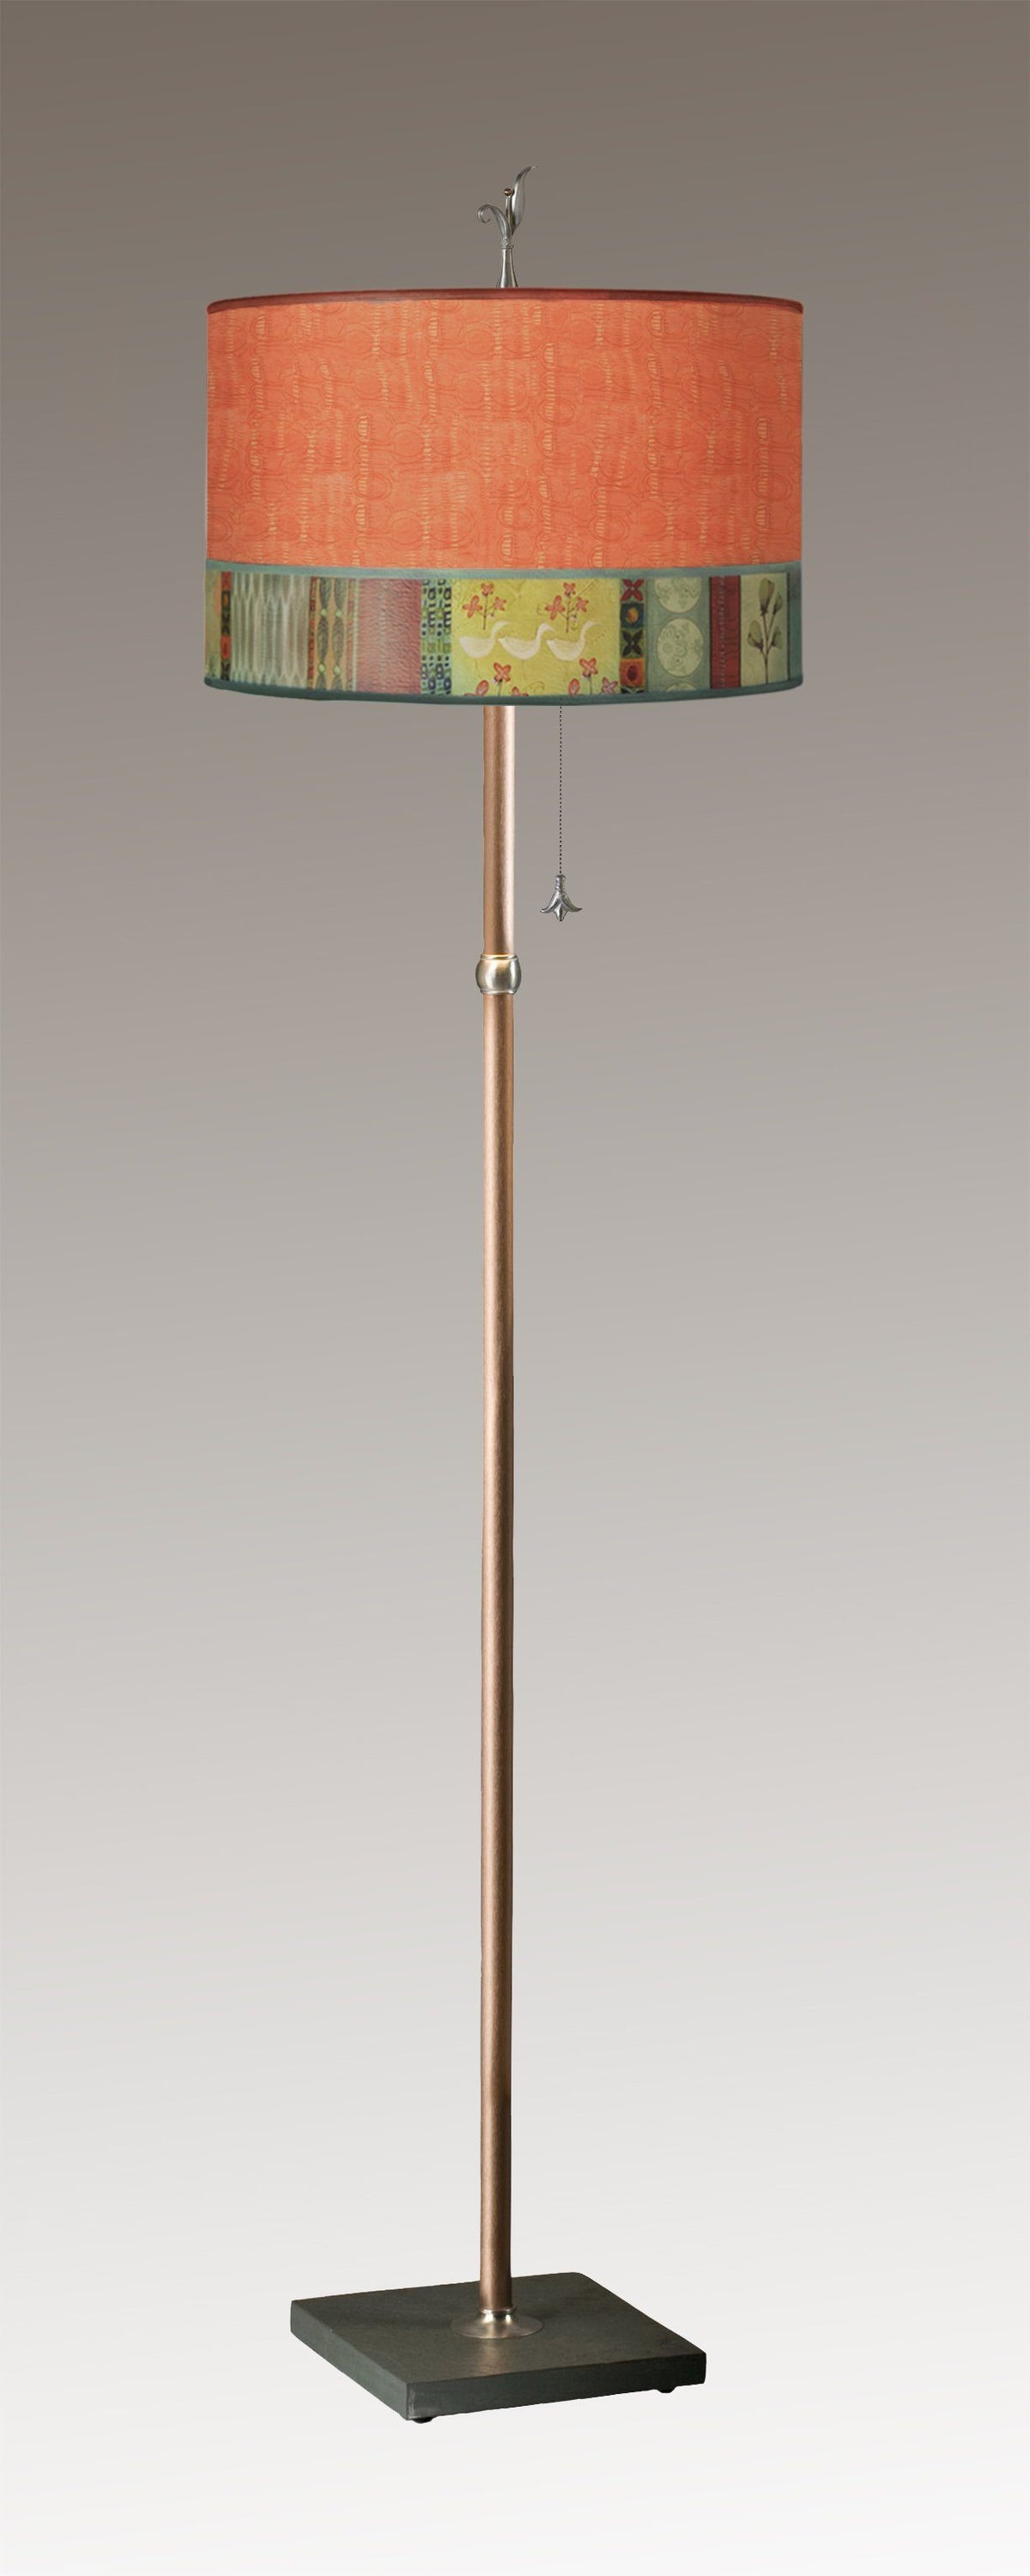 Janna Ugone &amp; Co Floor Lamps Copper Floor Lamp with Large Drum Lampshade in Melody in Coral